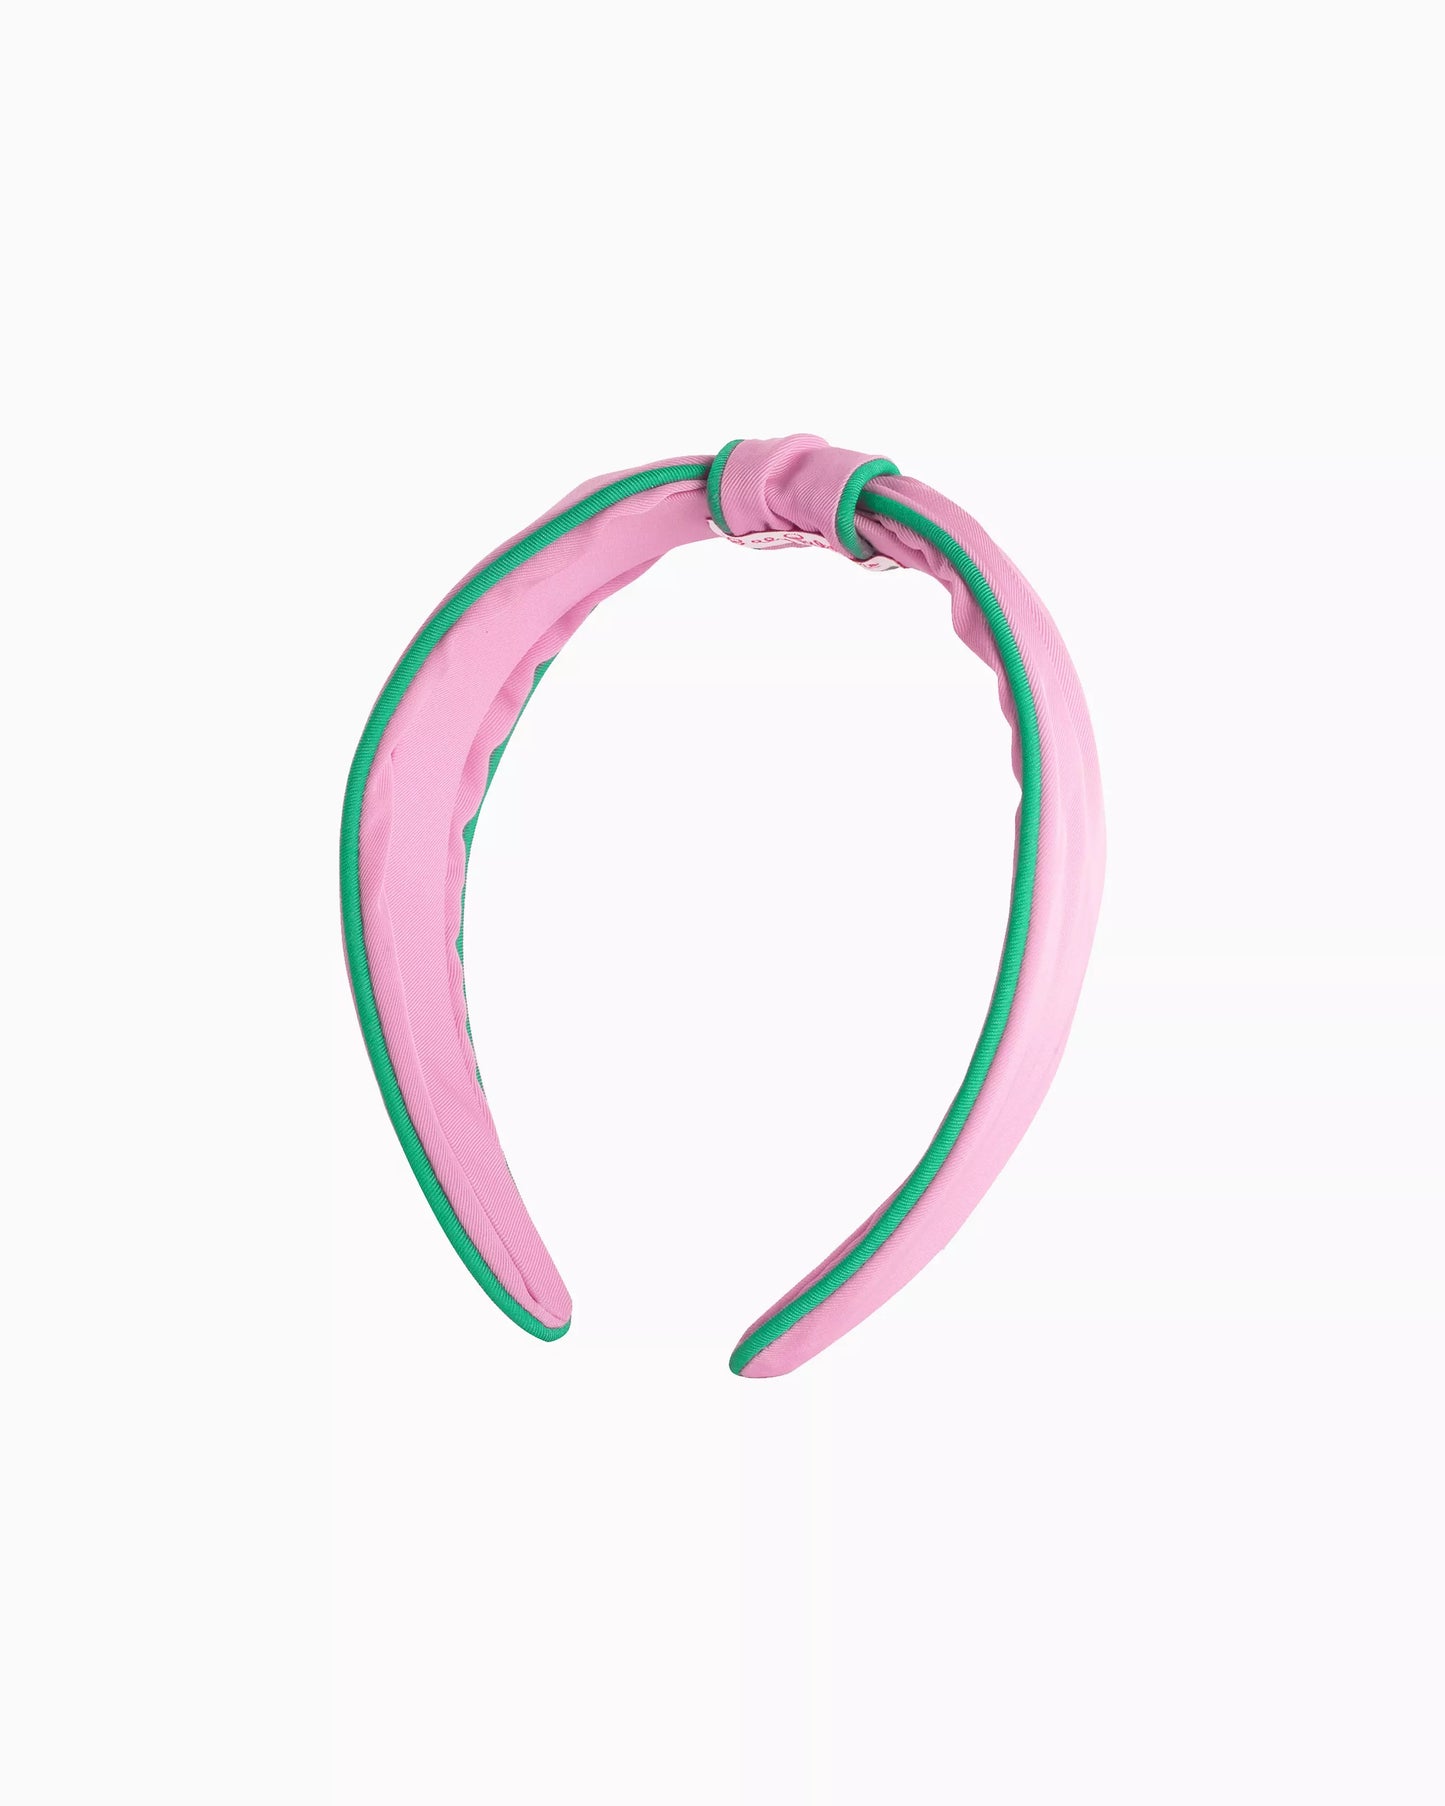 Lilly Pulitzer - Headband - Low Knot - Spearmint X Conch Shell Pink - Findlay Rowe Designs